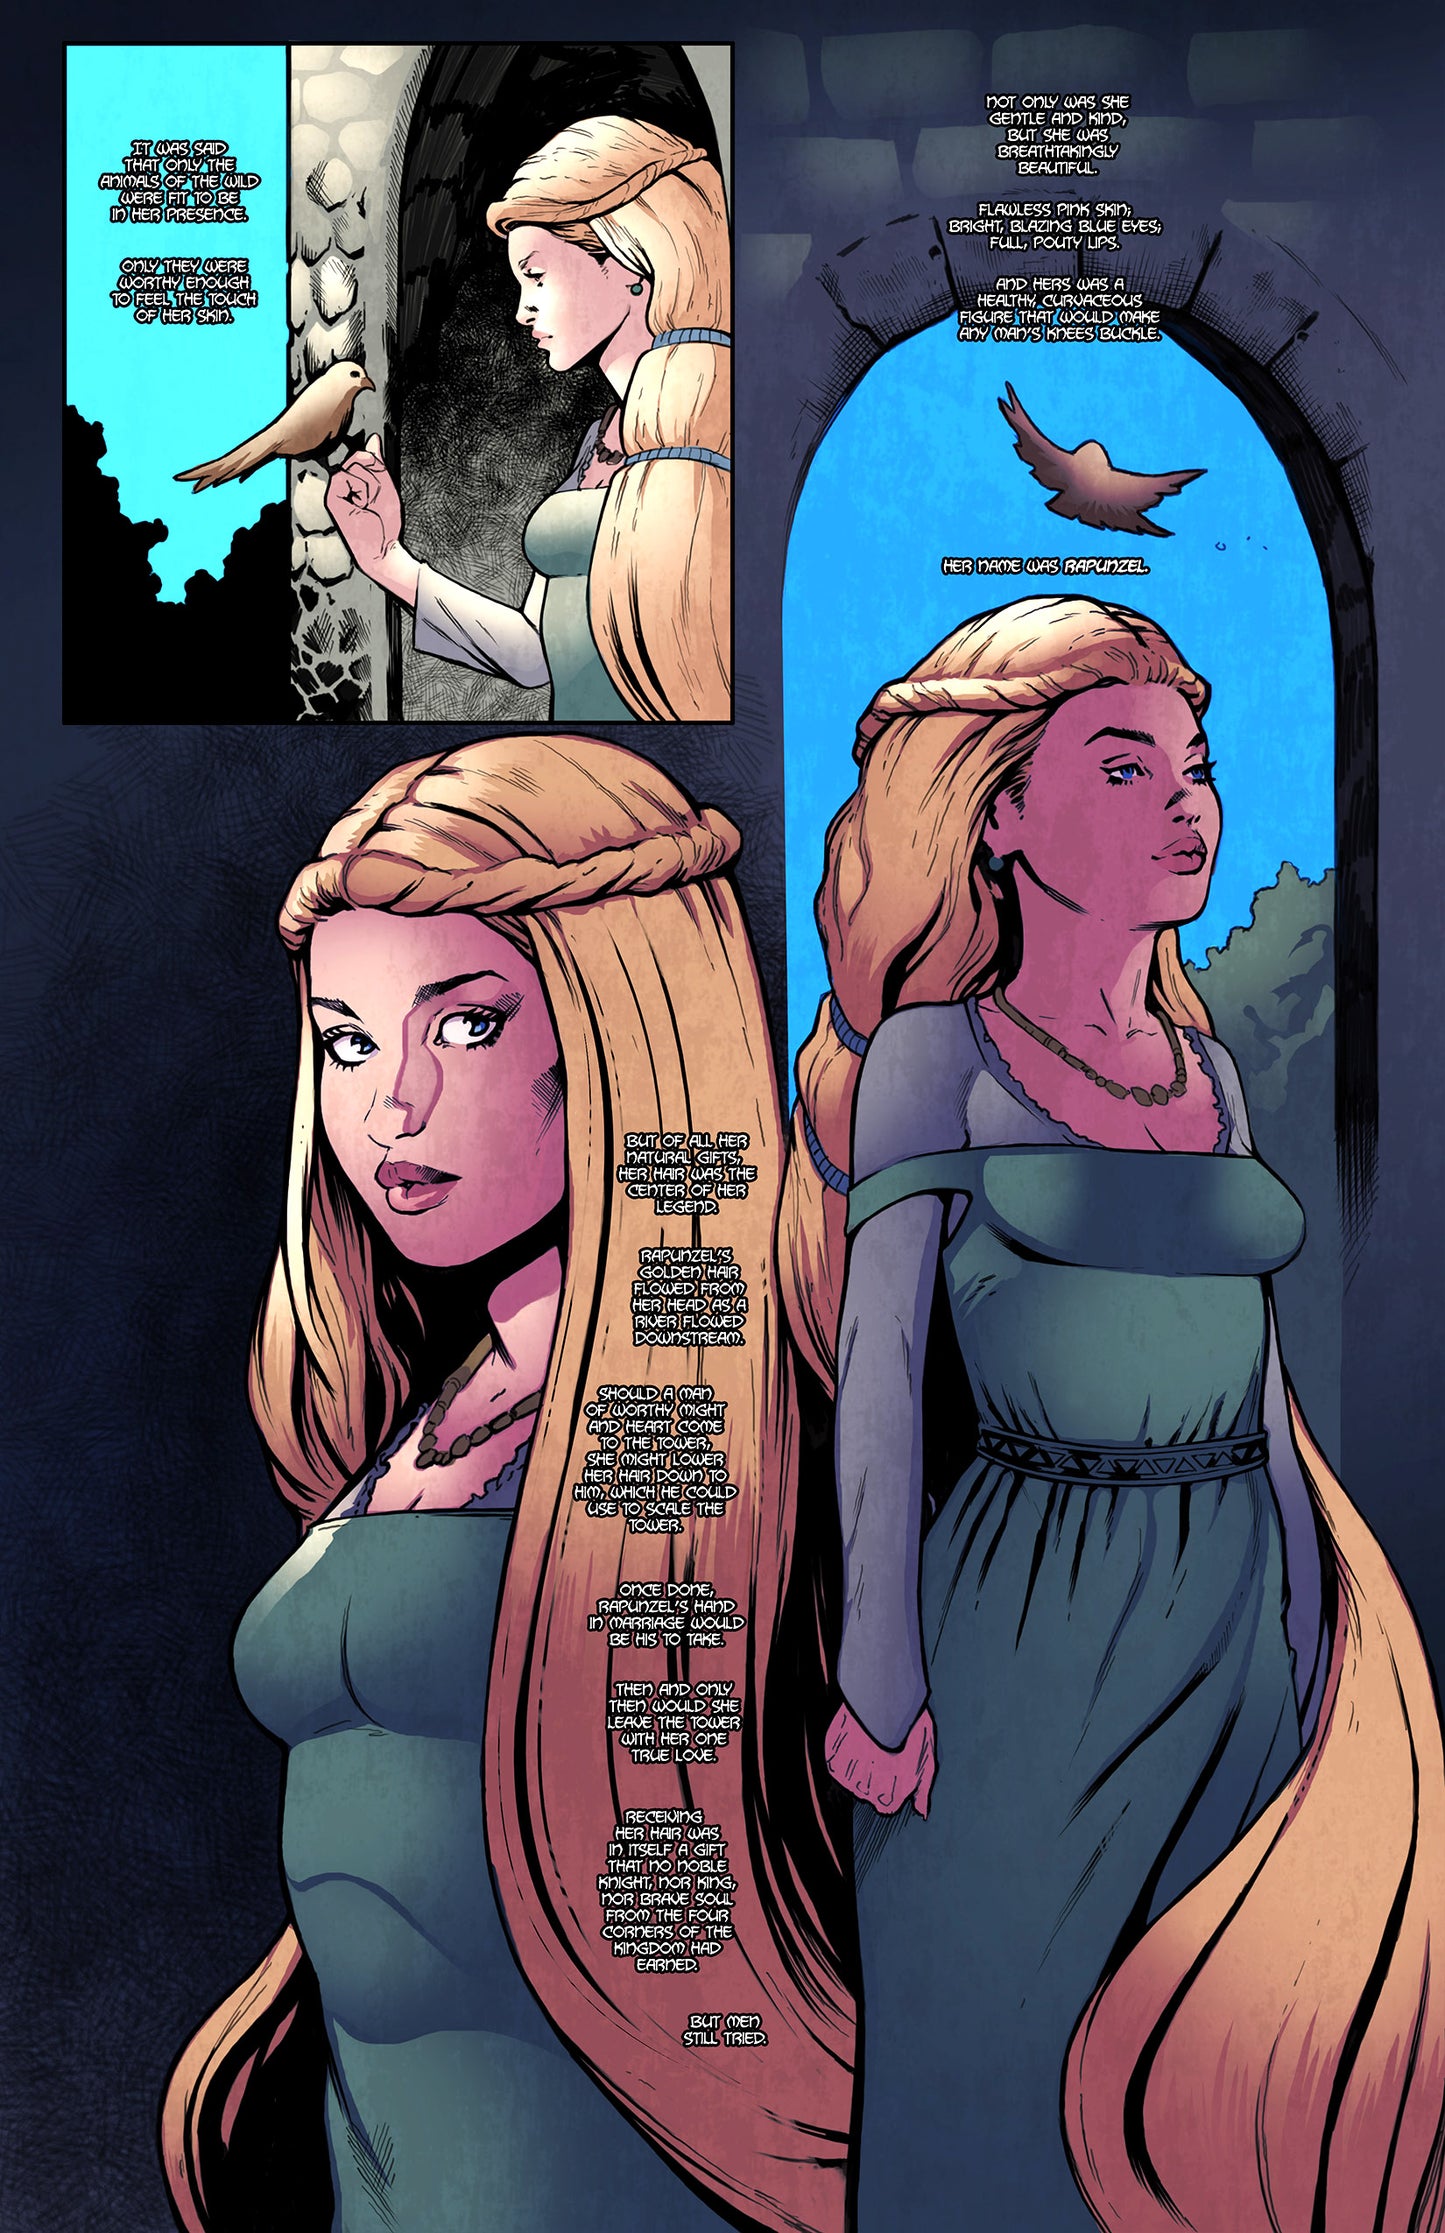 "Grimms' Girls in Fairyland Tales" Mature Graphic Novel PDF